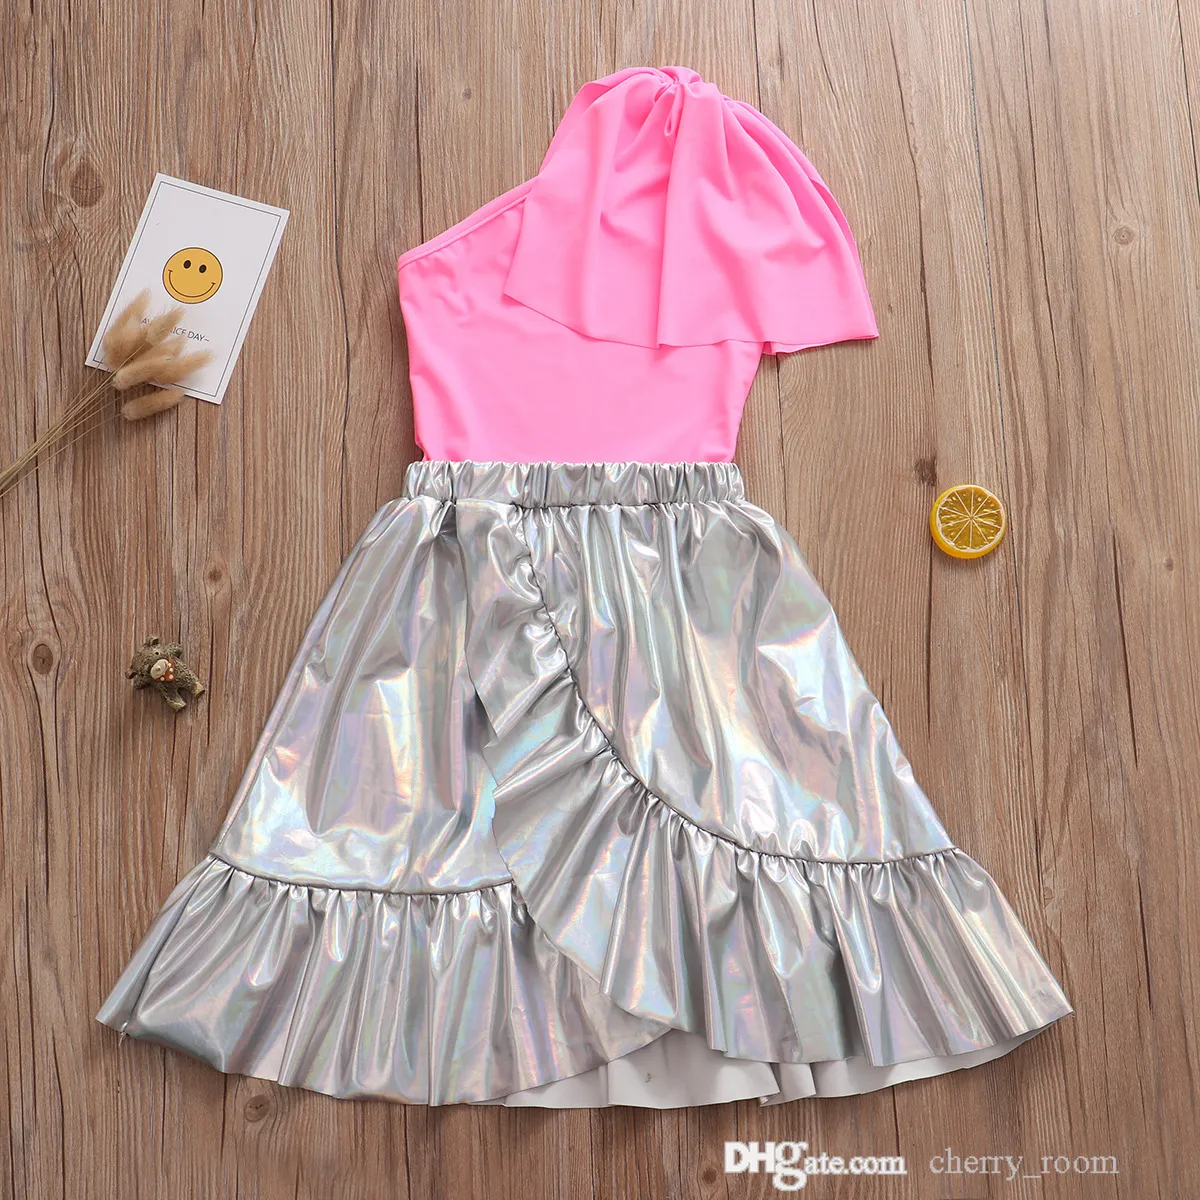 kids summer clothing sets fashion girl sloping shoulder top + irregular buttocks skirt 2pcs suit children casual dance performance outfits S1408